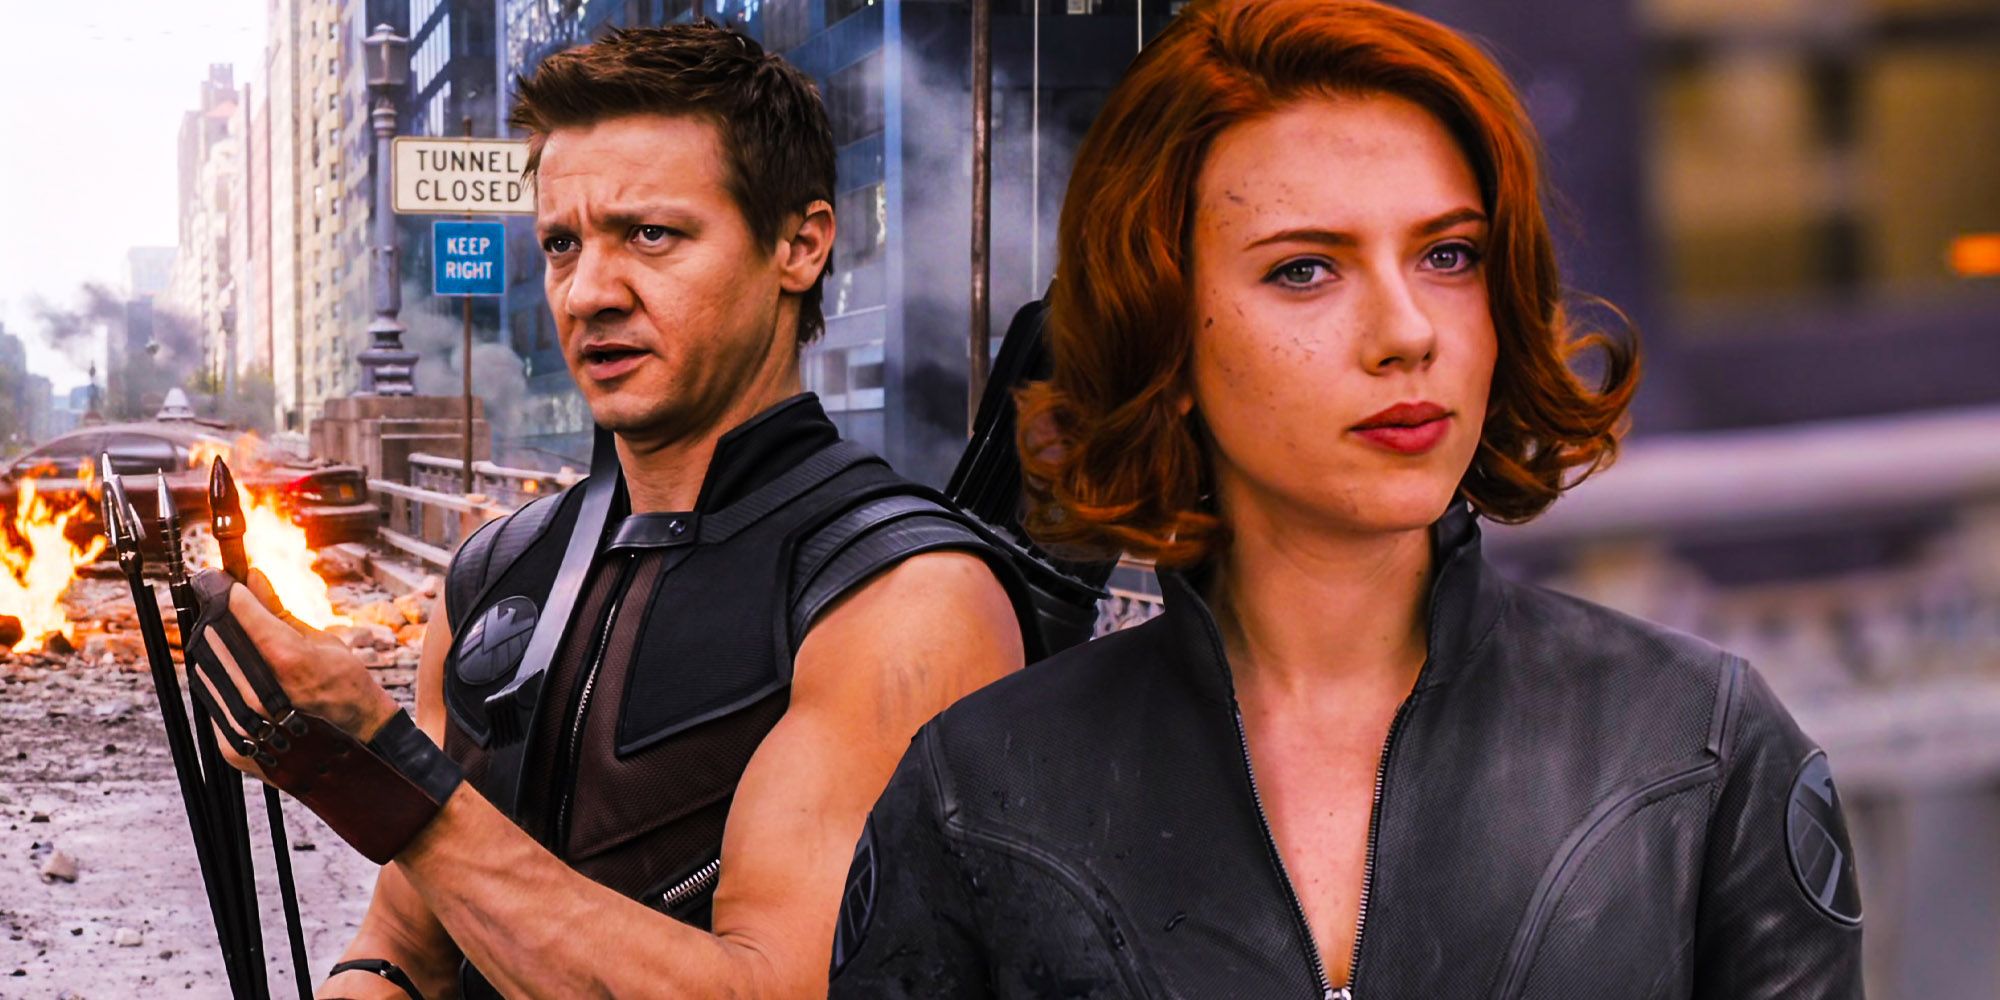 Why are black widow and hawkeye avengers without super powers